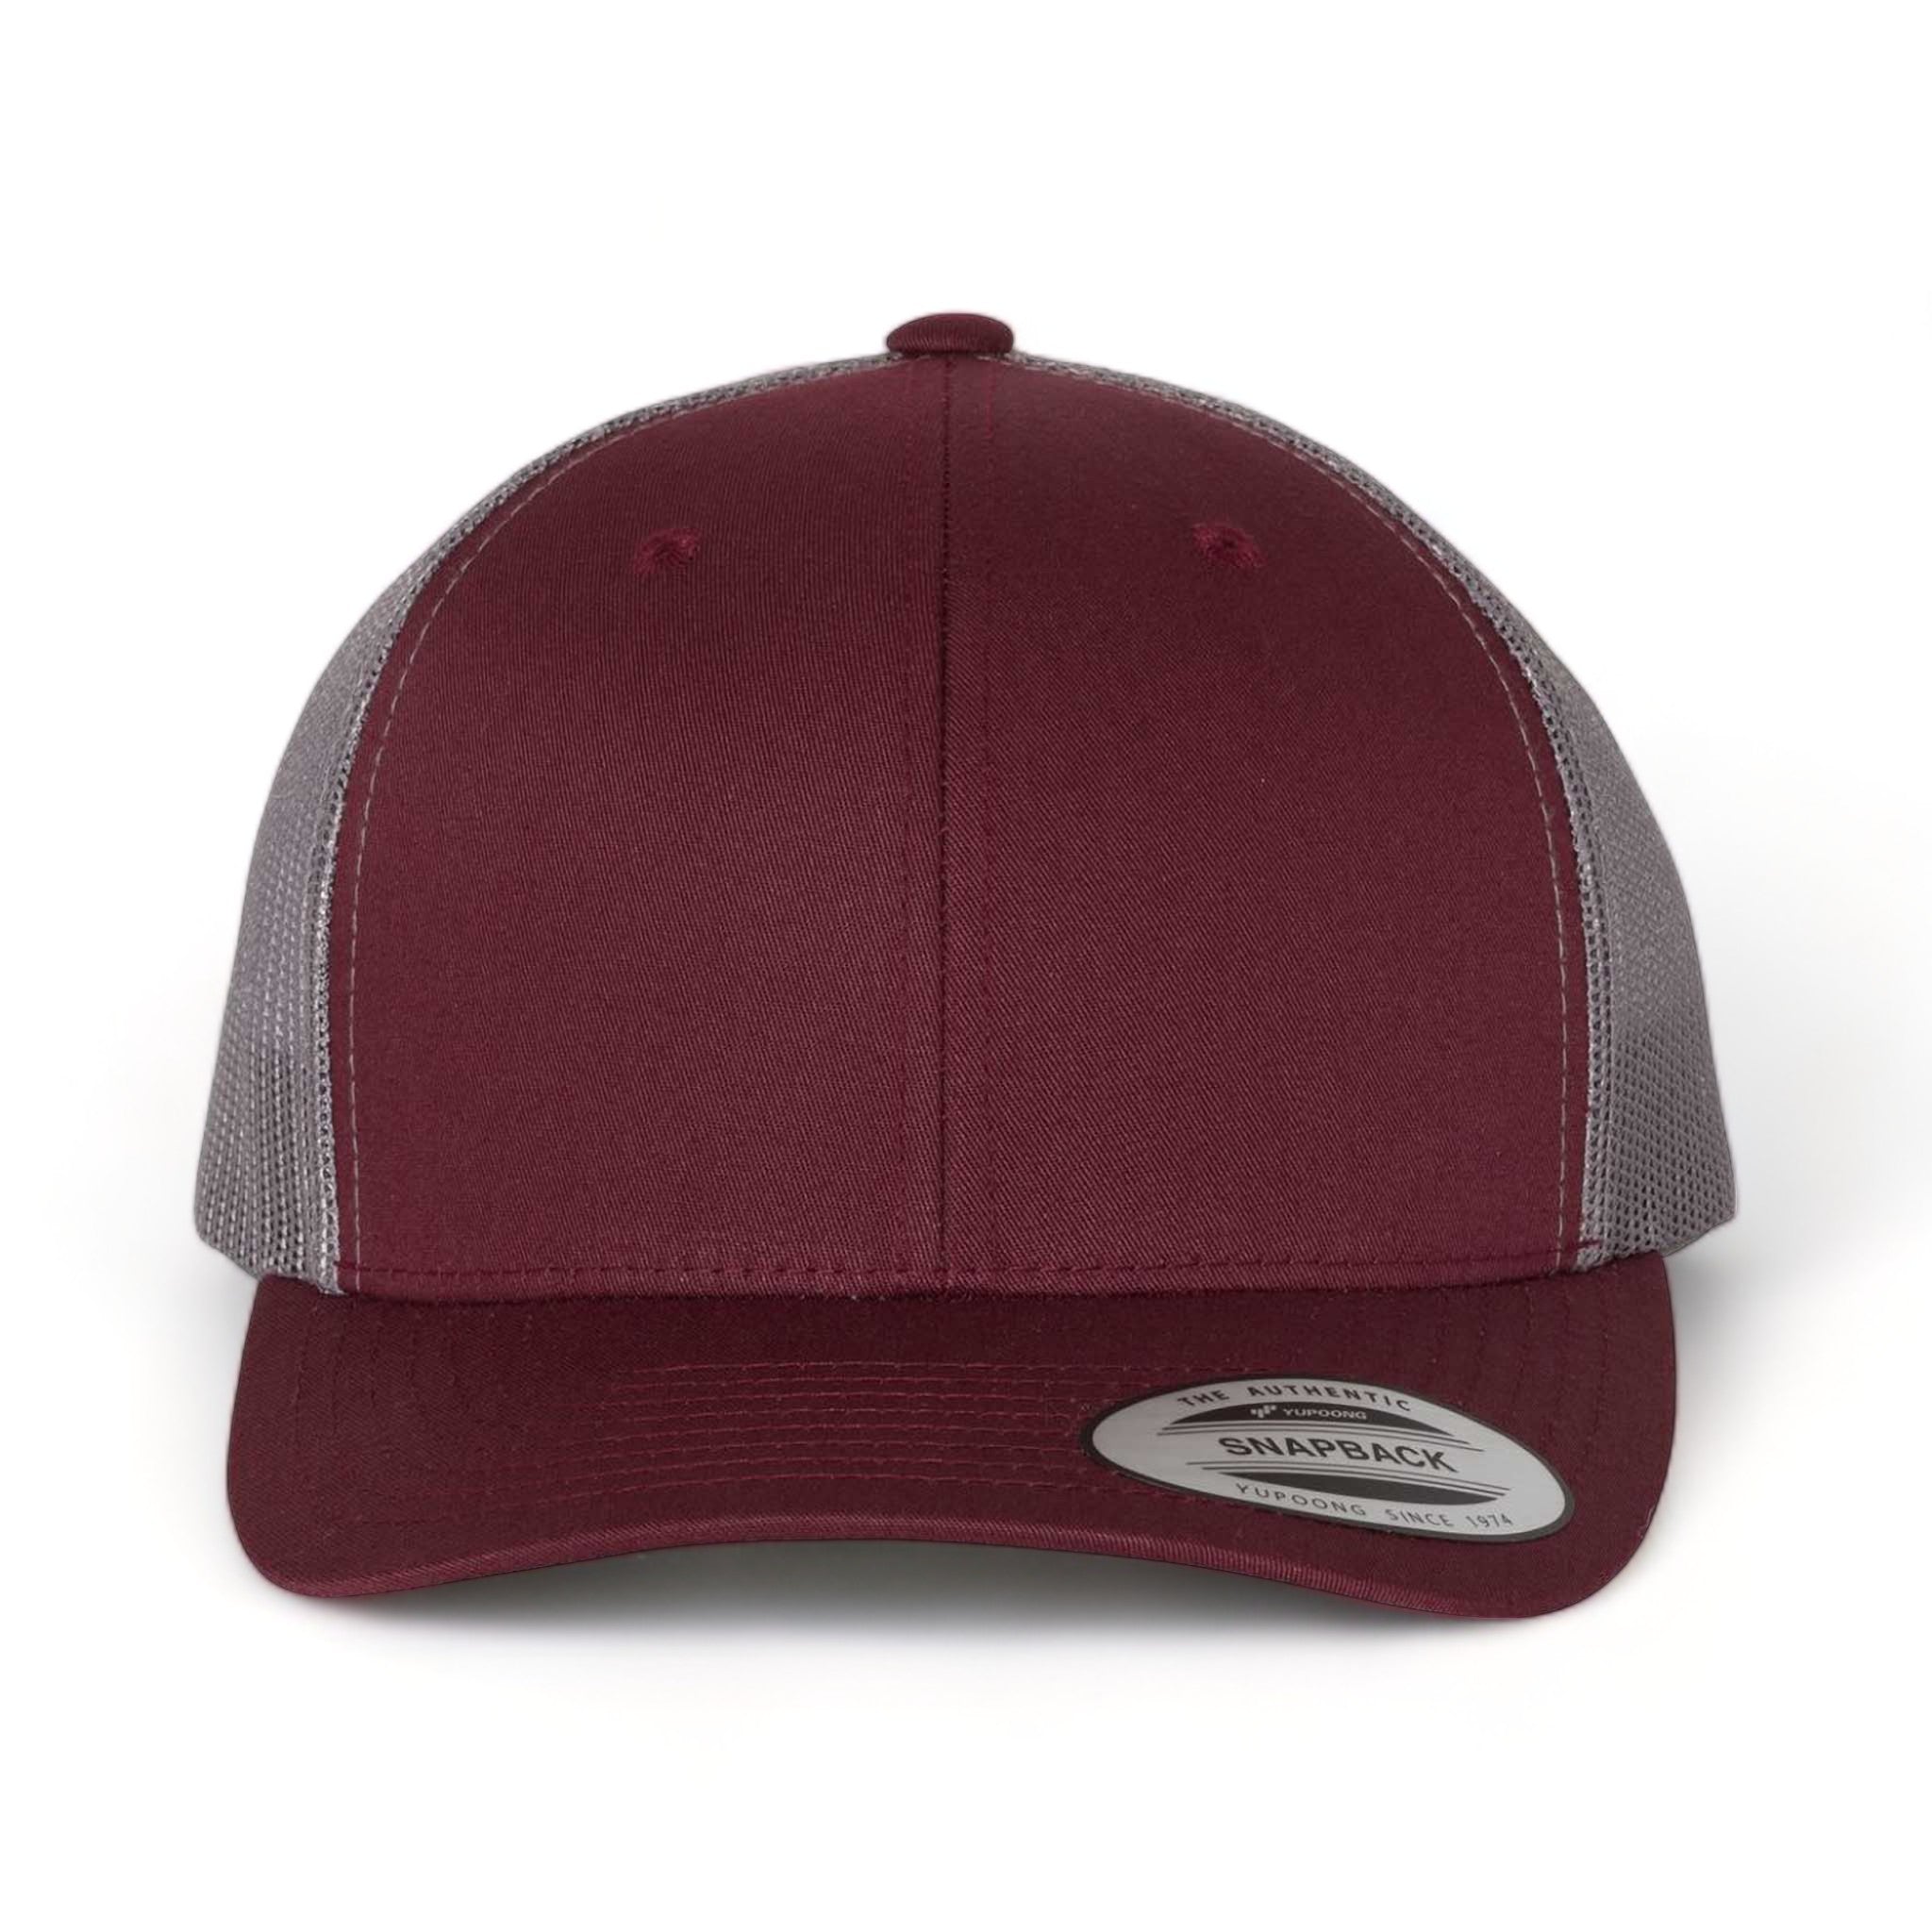 Front view of YP Classics 6606 custom hat in maroon and grey